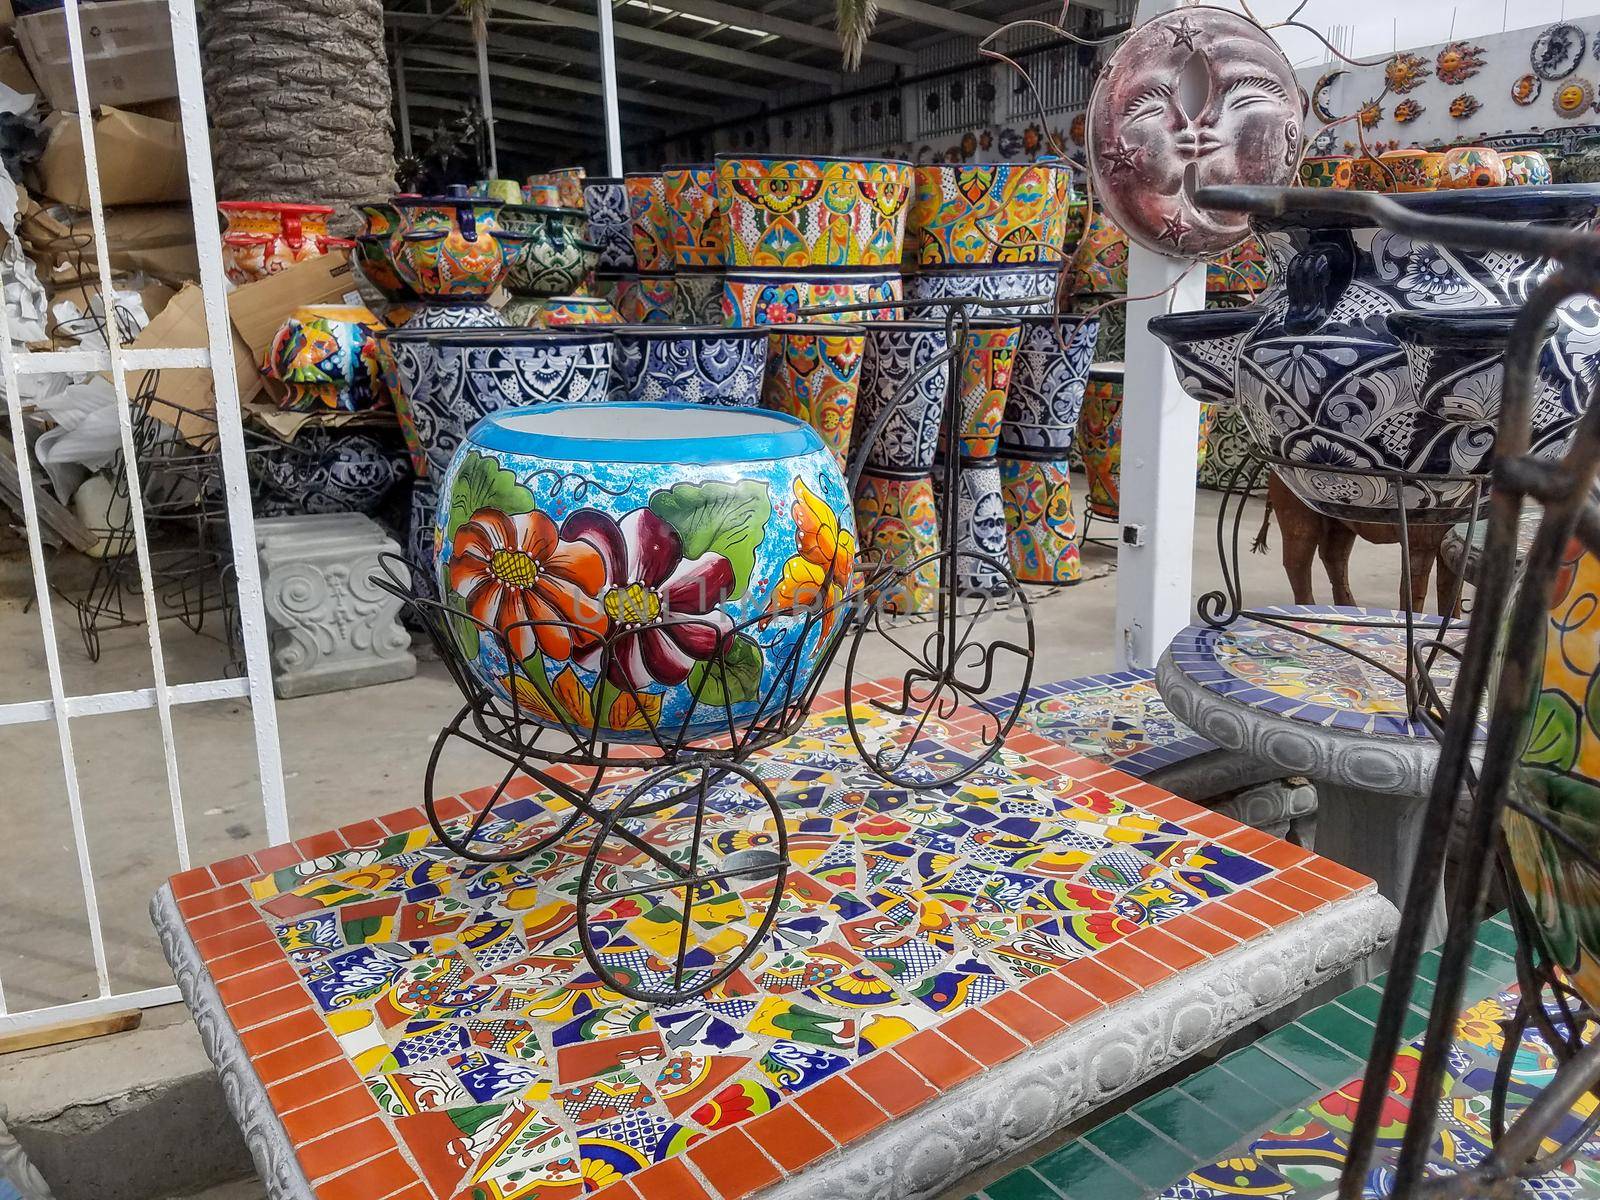 Mexican talavera flower pots and products, Baja California by RobertPB